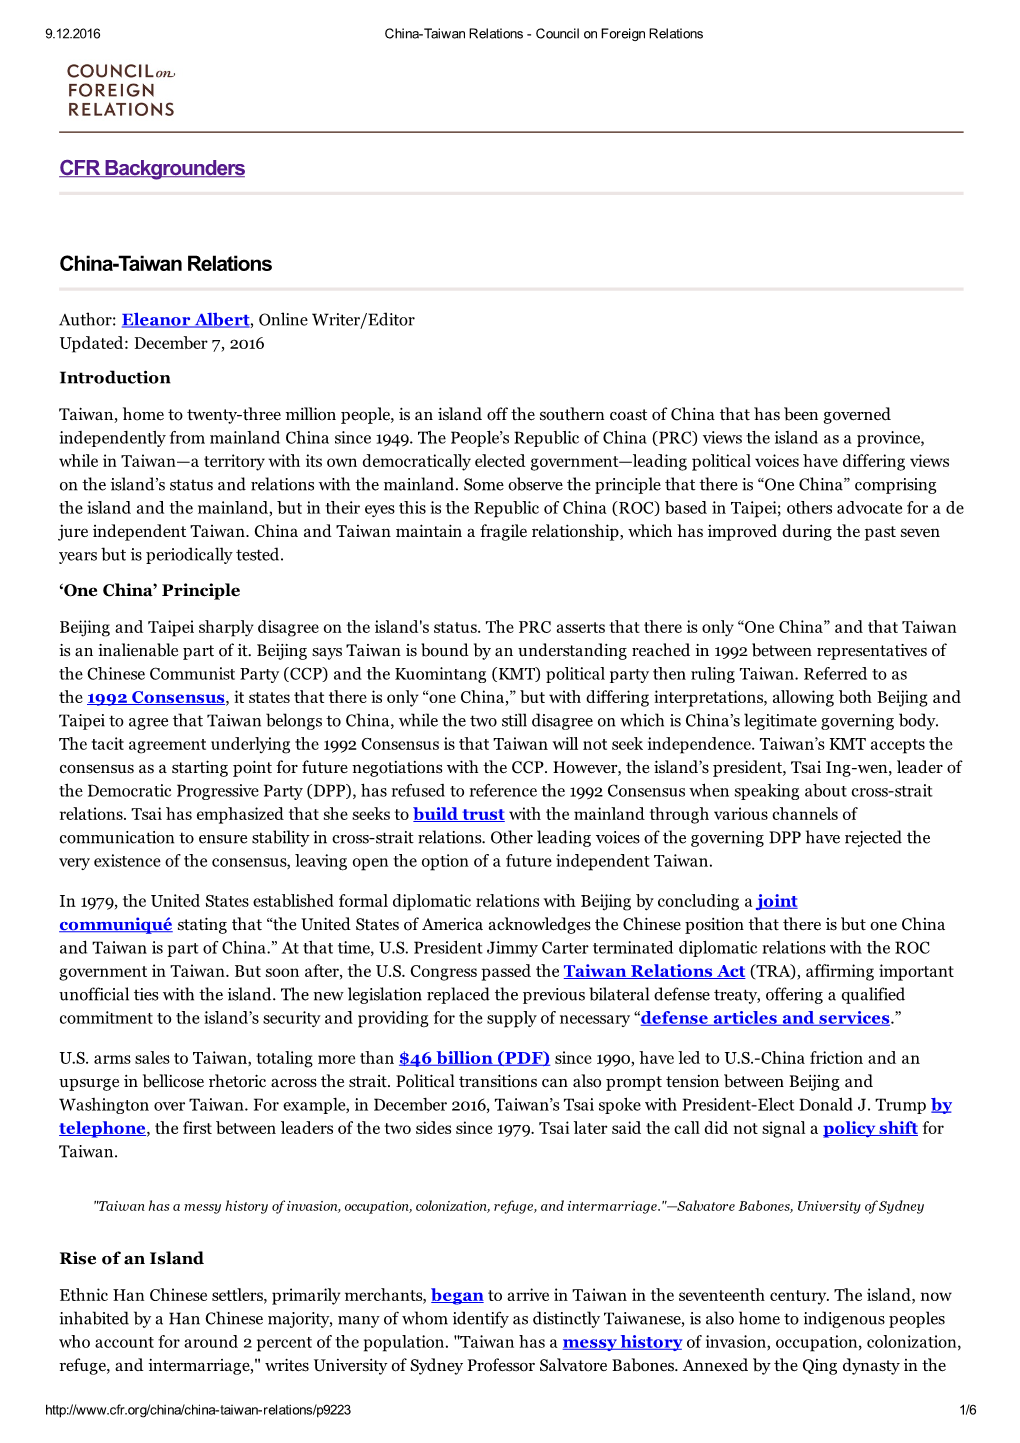 CFR Backgrounders Chinataiwan Relations